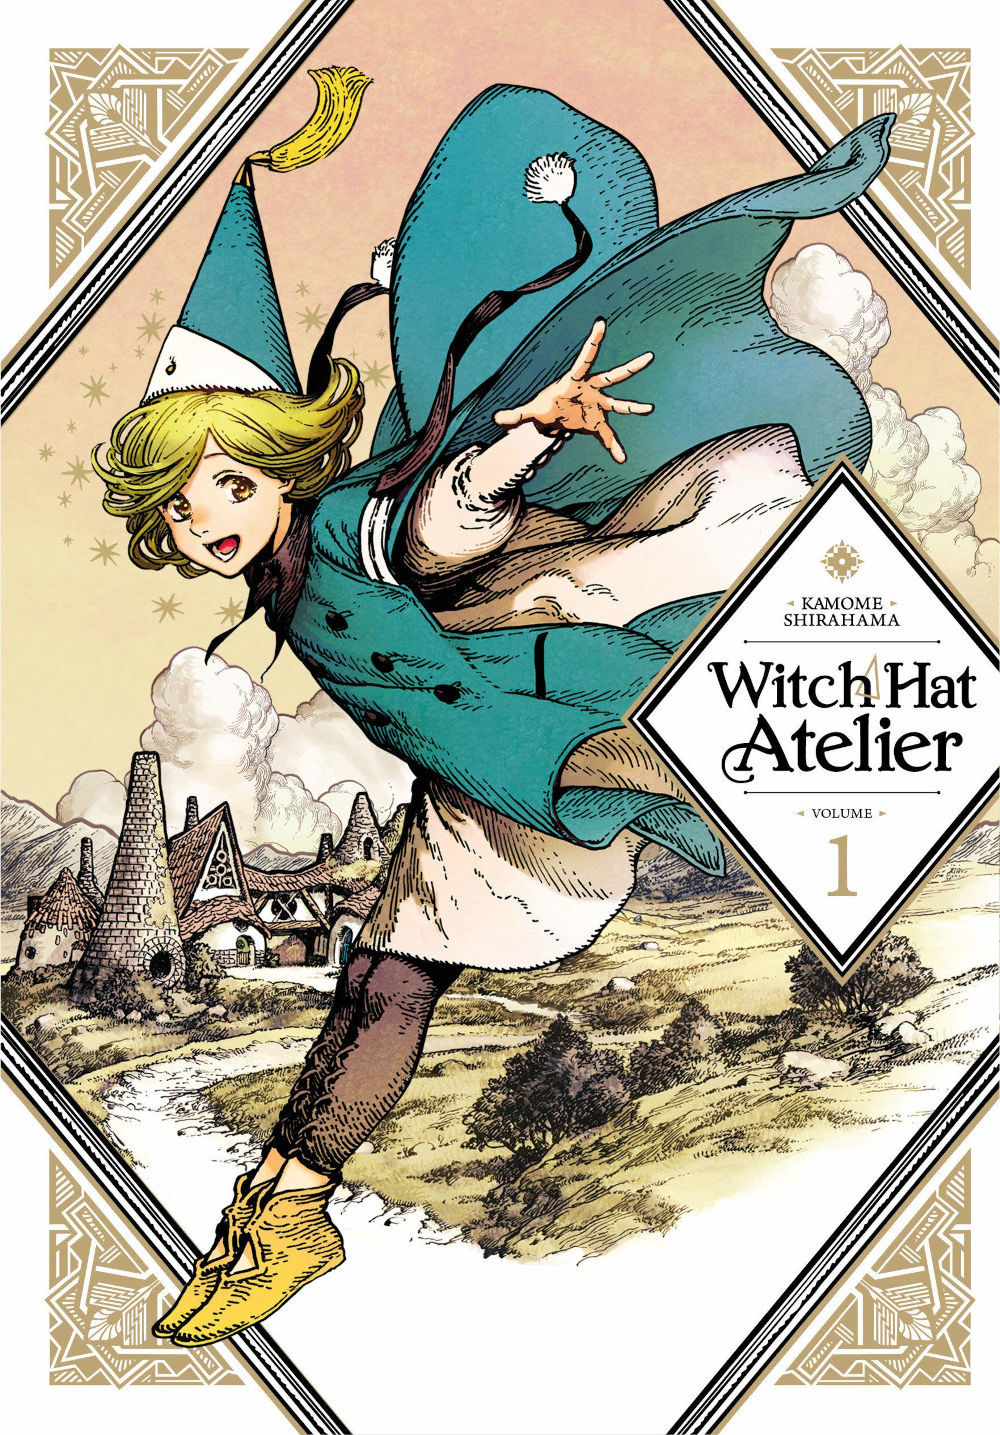 Witch Hat Atelier will have anime